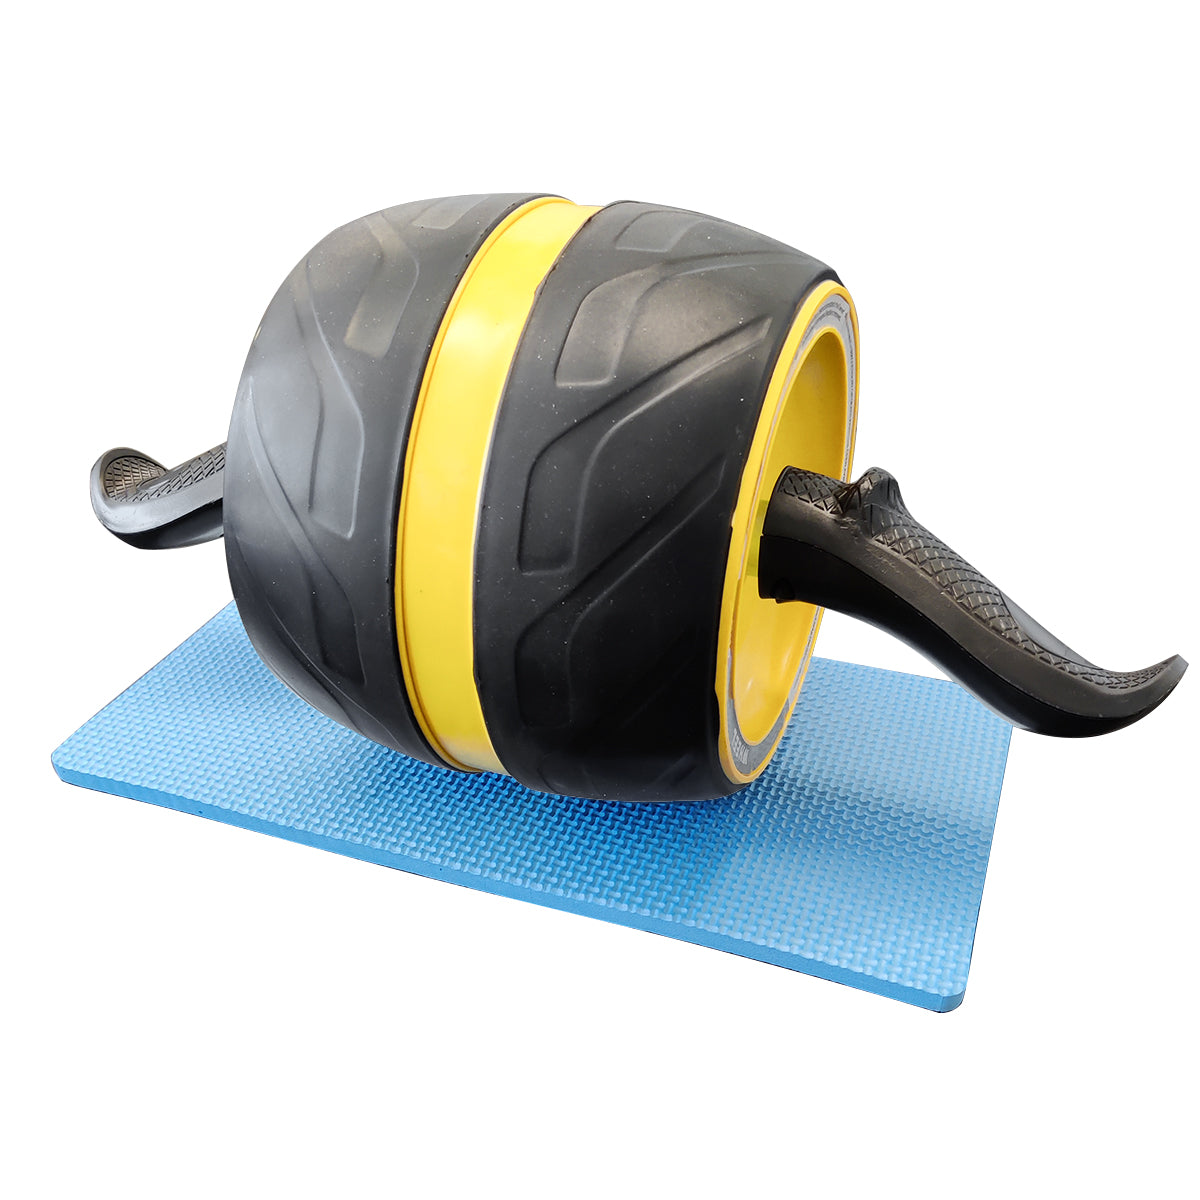 Ab Exercise Roller Wheel Pro with Knee Pad Yellow